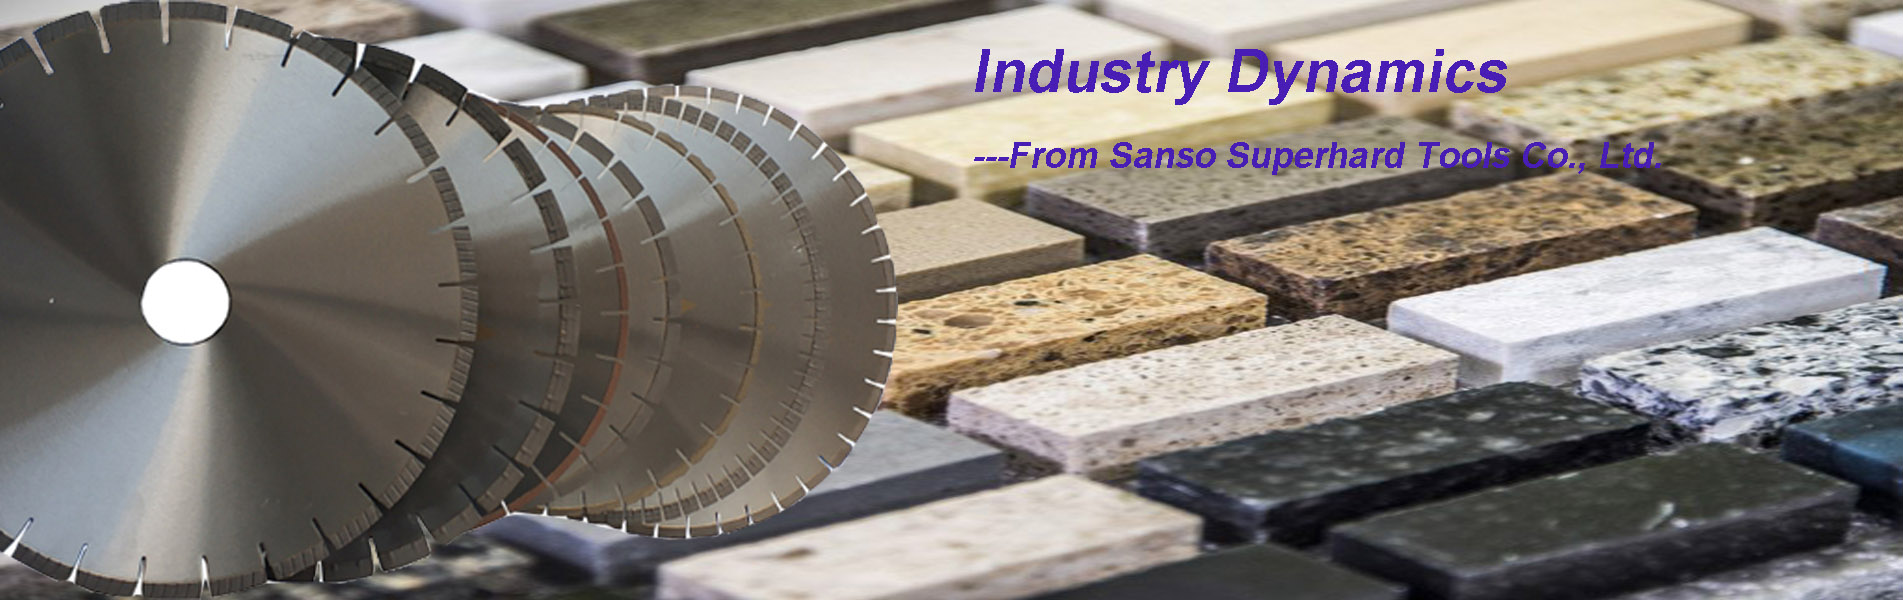 Industry Dynamics from Sanso Superhard Tools Co., Ltd.